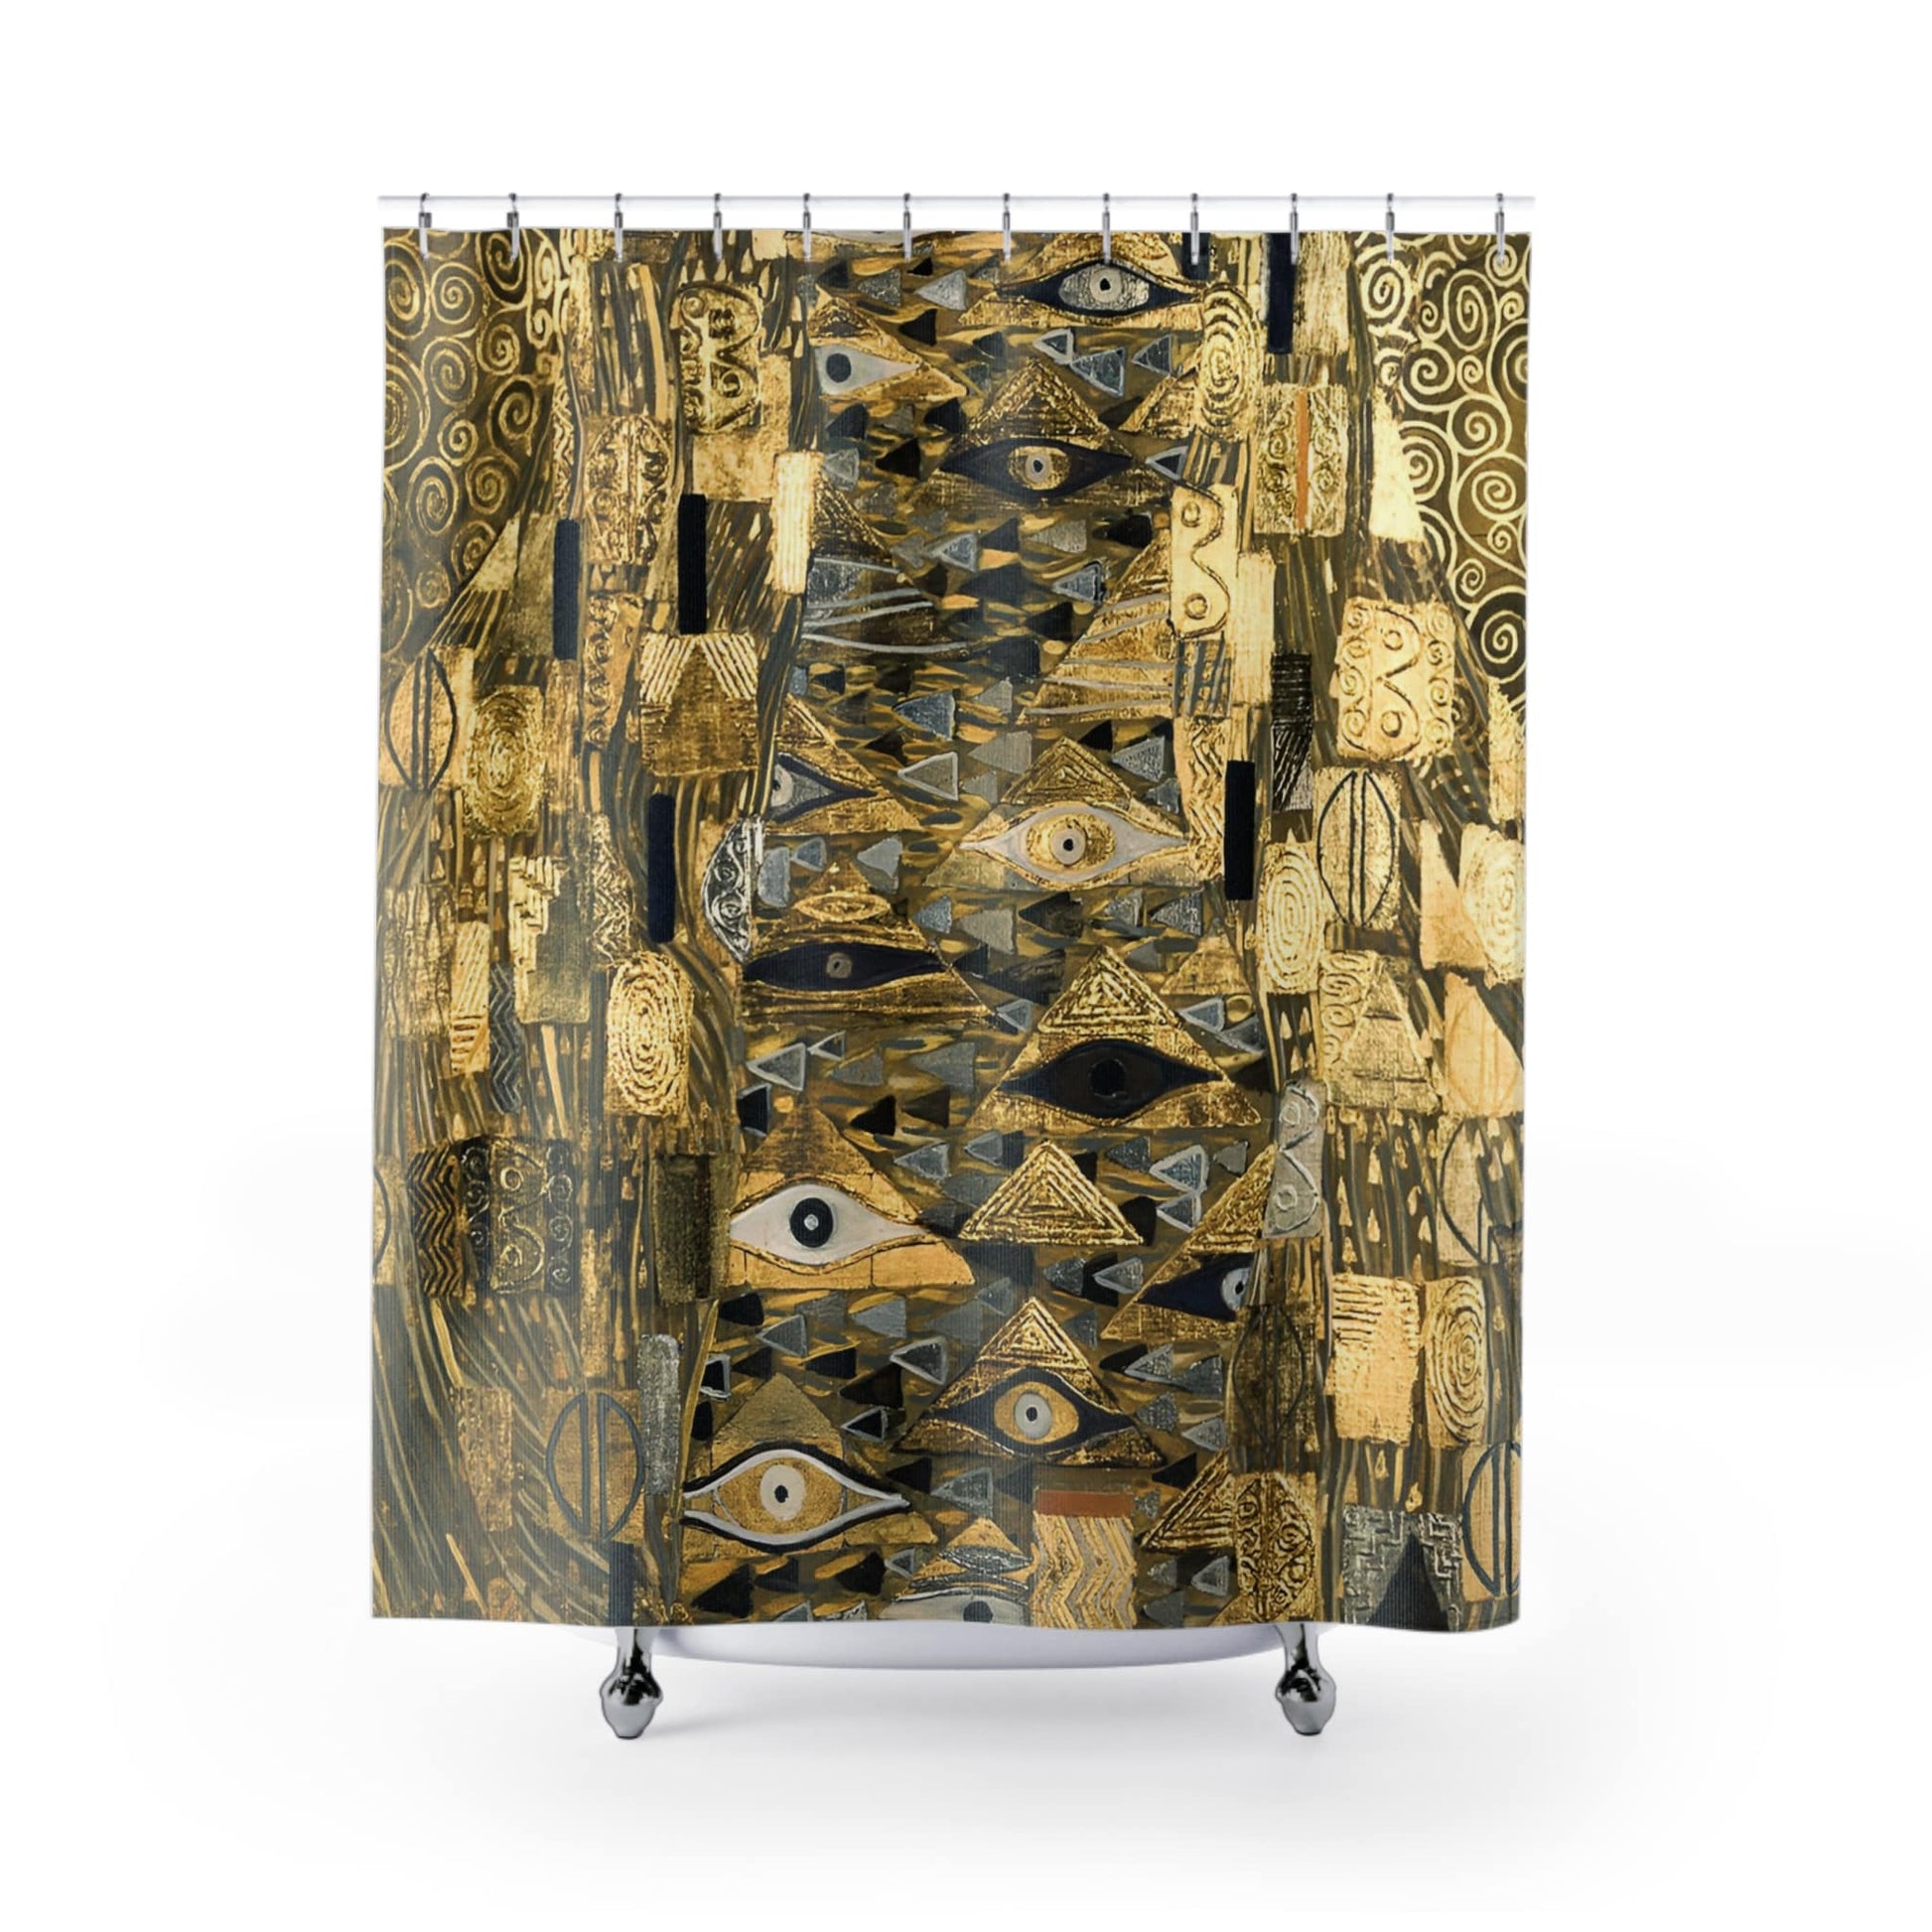 The Lady in Gold Shower Curtain with Gustav Klimt design, artistic bathroom decor featuring Klimt's renowned artwork.